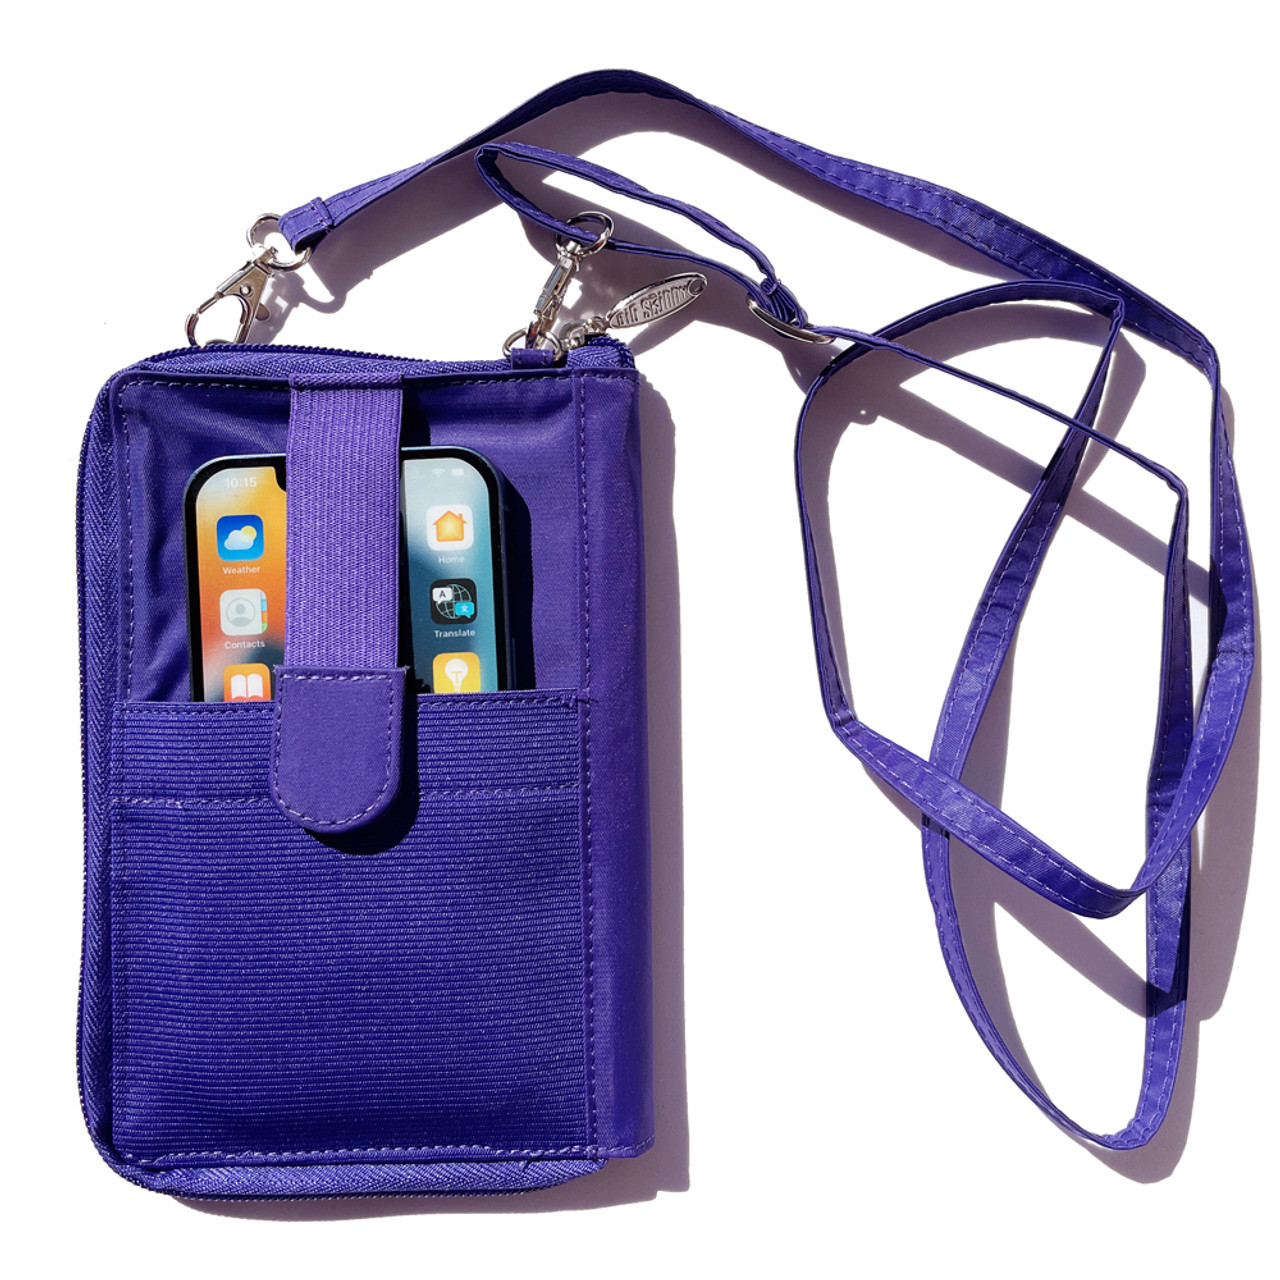 Neck Pouch Bag for Cell Phone, Travel Neck Purse for Mobile Phone